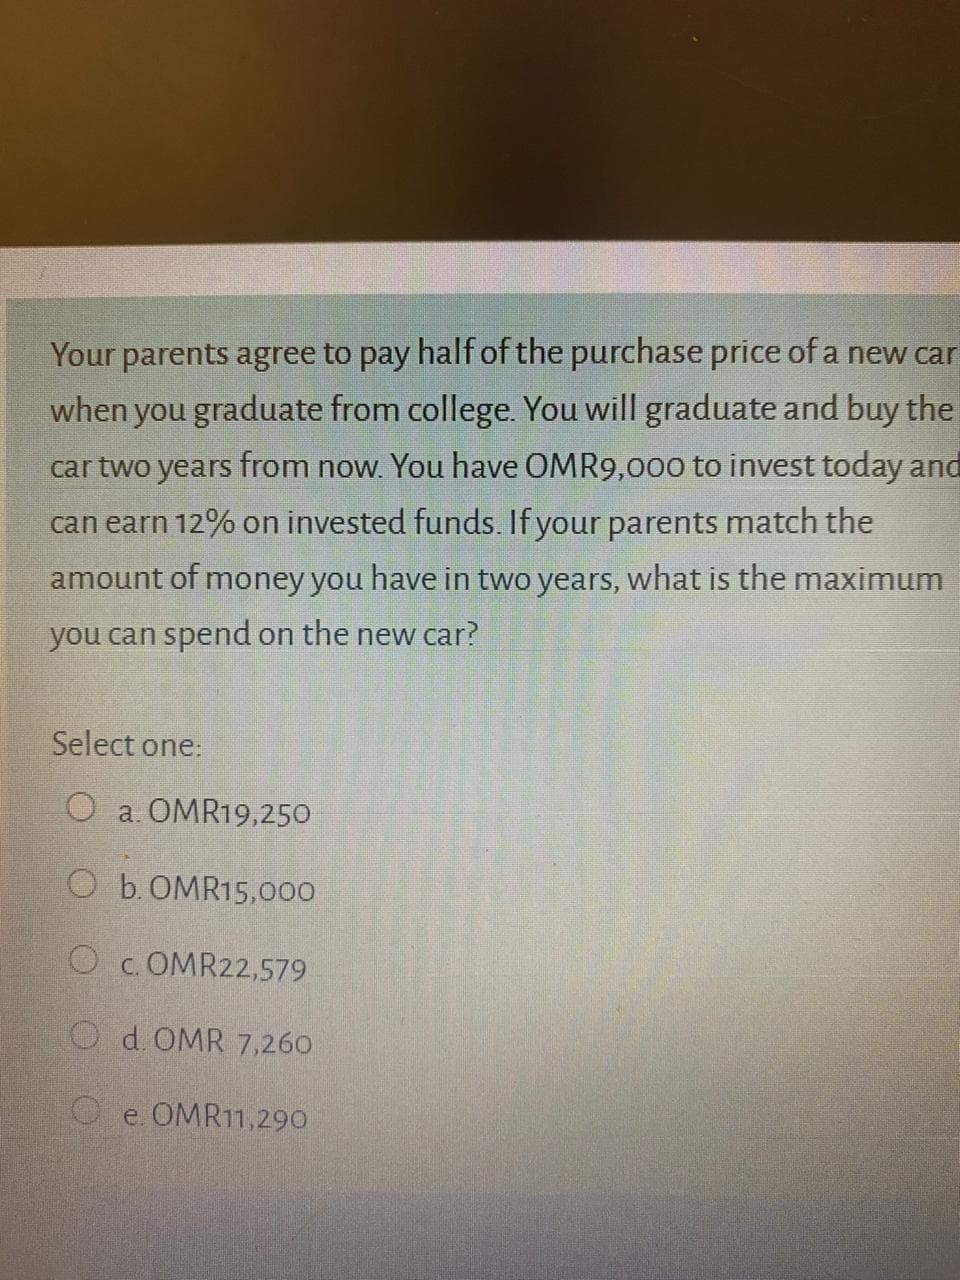 Your parents agree to pay half of the purchase price of a new car
when you graduate from college. You will graduate and buy the
car two years from now. You have OMR9,000 to invest today and
can earn 12% on invested funds. If your parents match the
amount of money you have in two years, what is the maximum
you can spend on the new car?
Select one:
O a. OMR19,250
O b.OMR15,000
O
c. OMR22,579
O d.OMR 7,260
O e. OMR11,290
